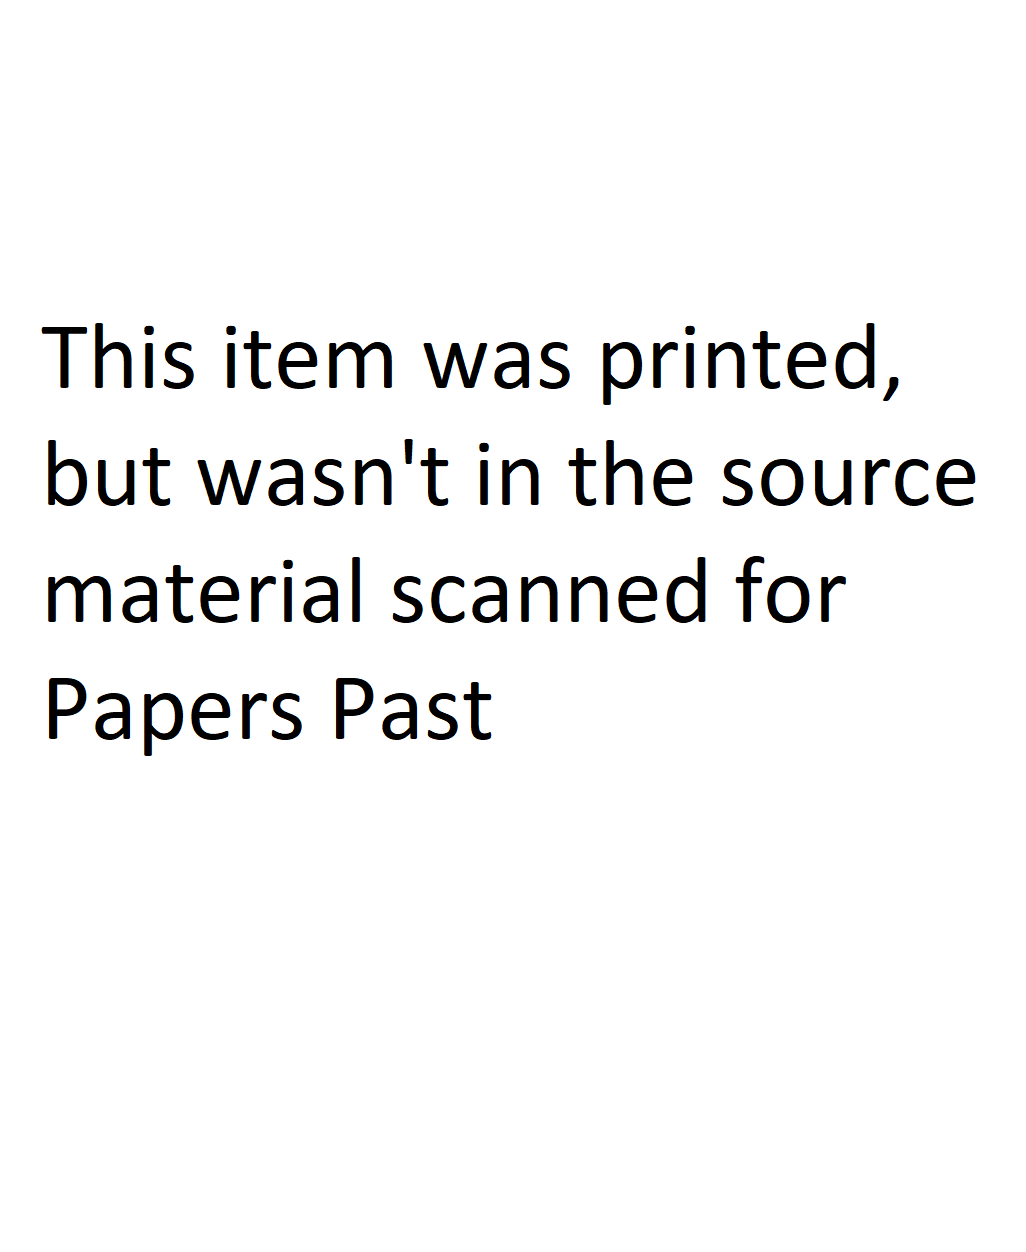 This item was printed, but wasn't in the source material scanned for Papers Past